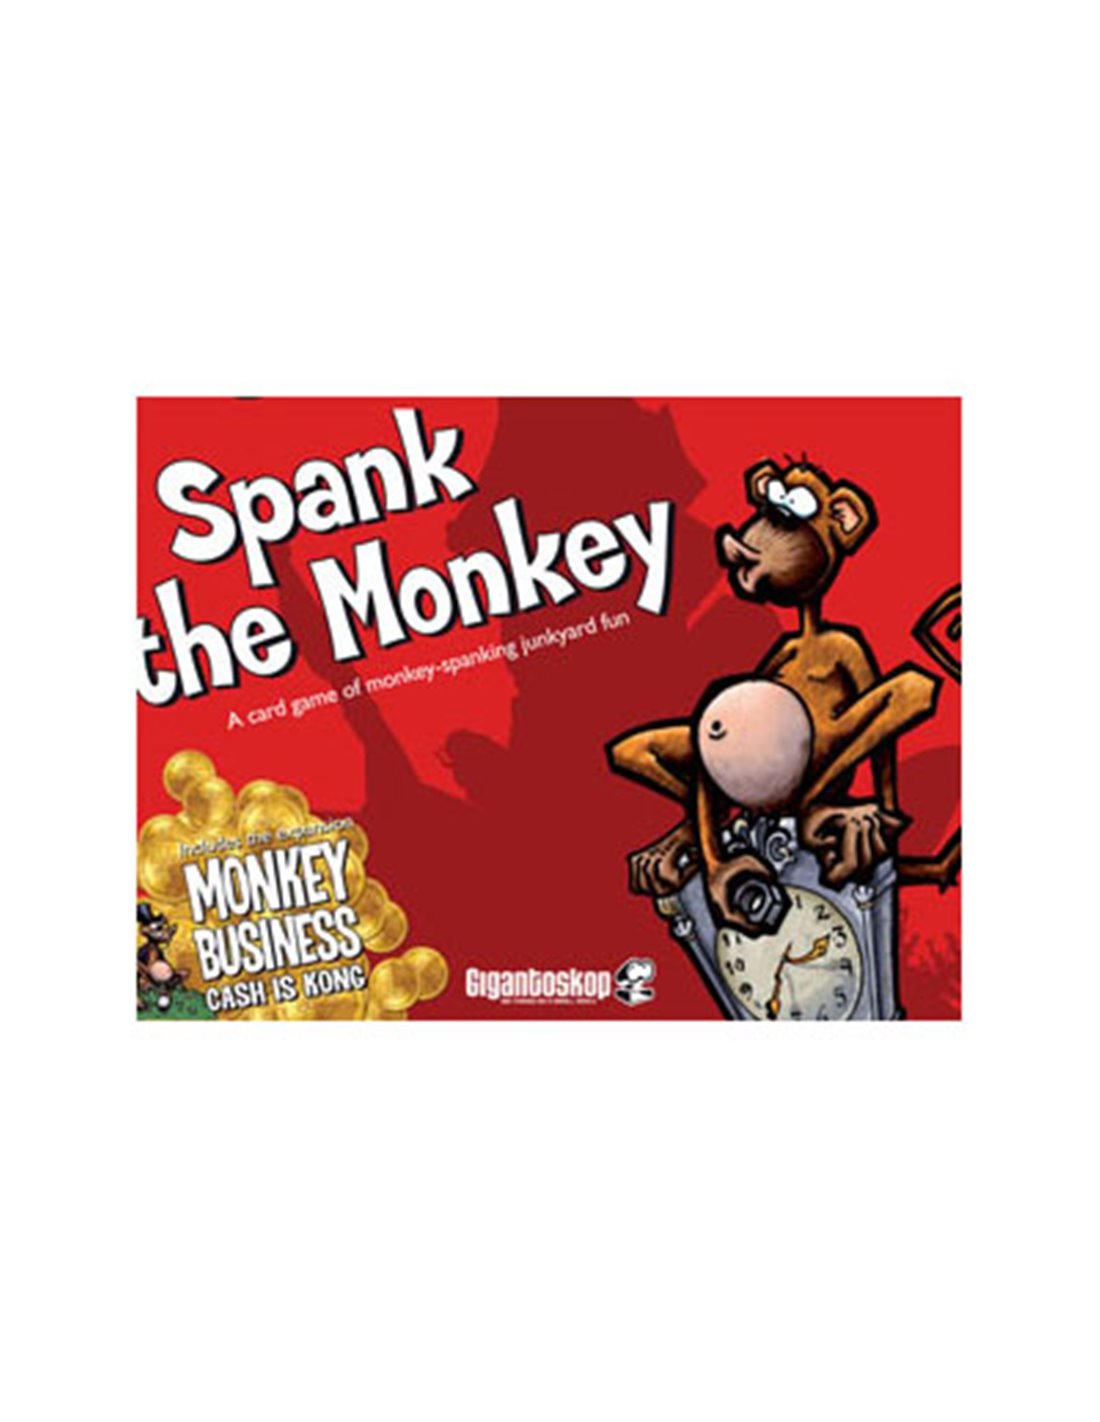 mund Gym kompleksitet Spank The Monkey (Inclusive the expansion: Monkey business - Cash is Kong)